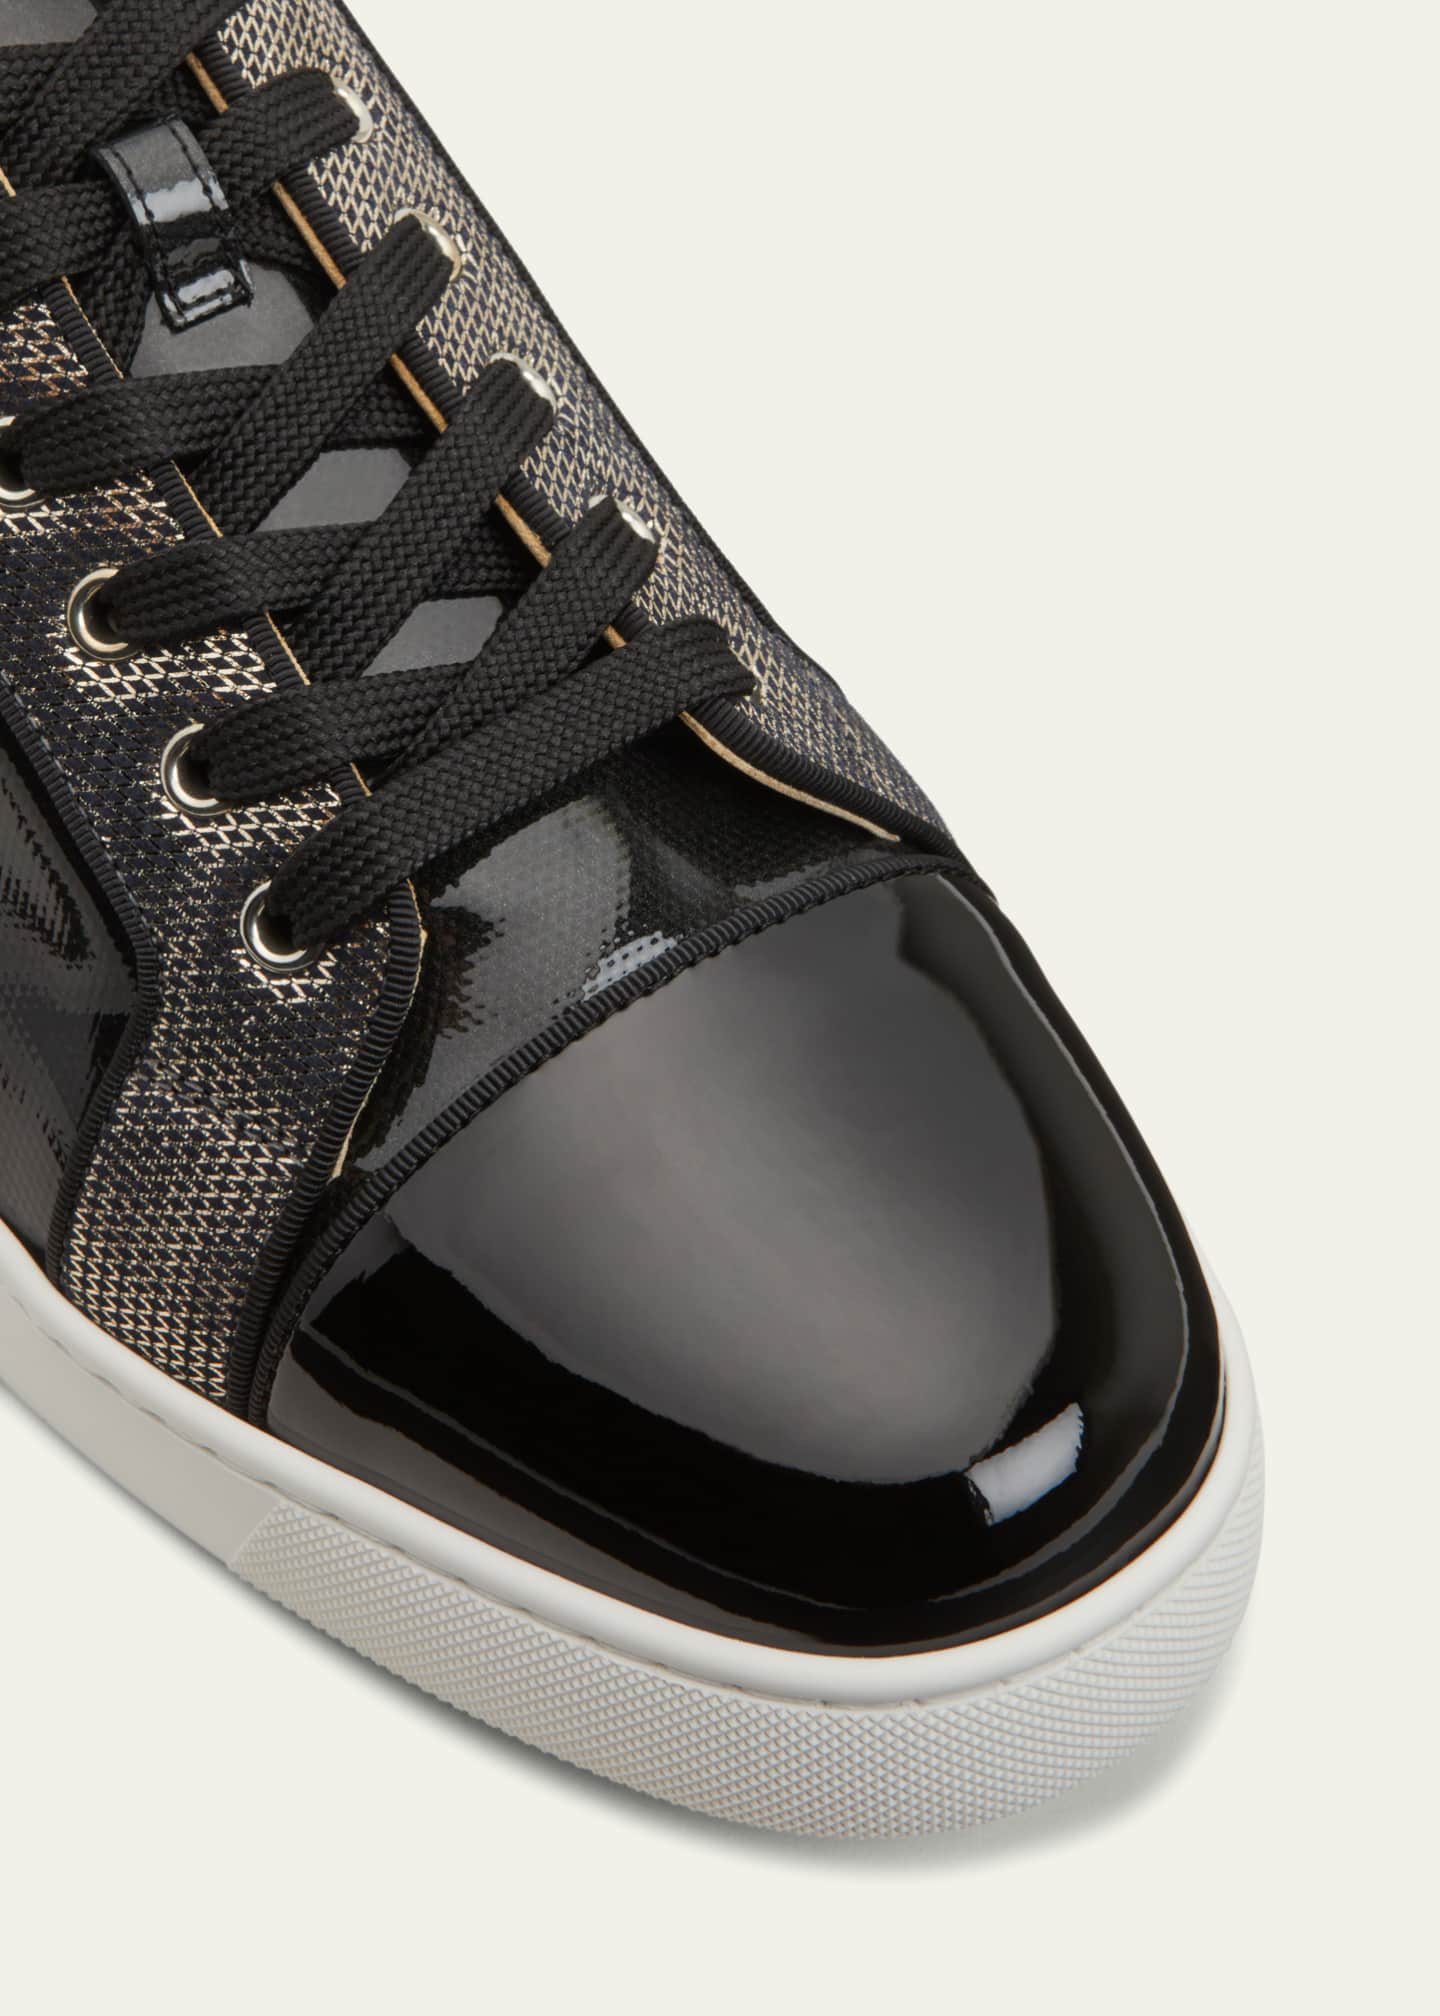 Christian Louboutin Men's Louis Leather High-Top Sneakers